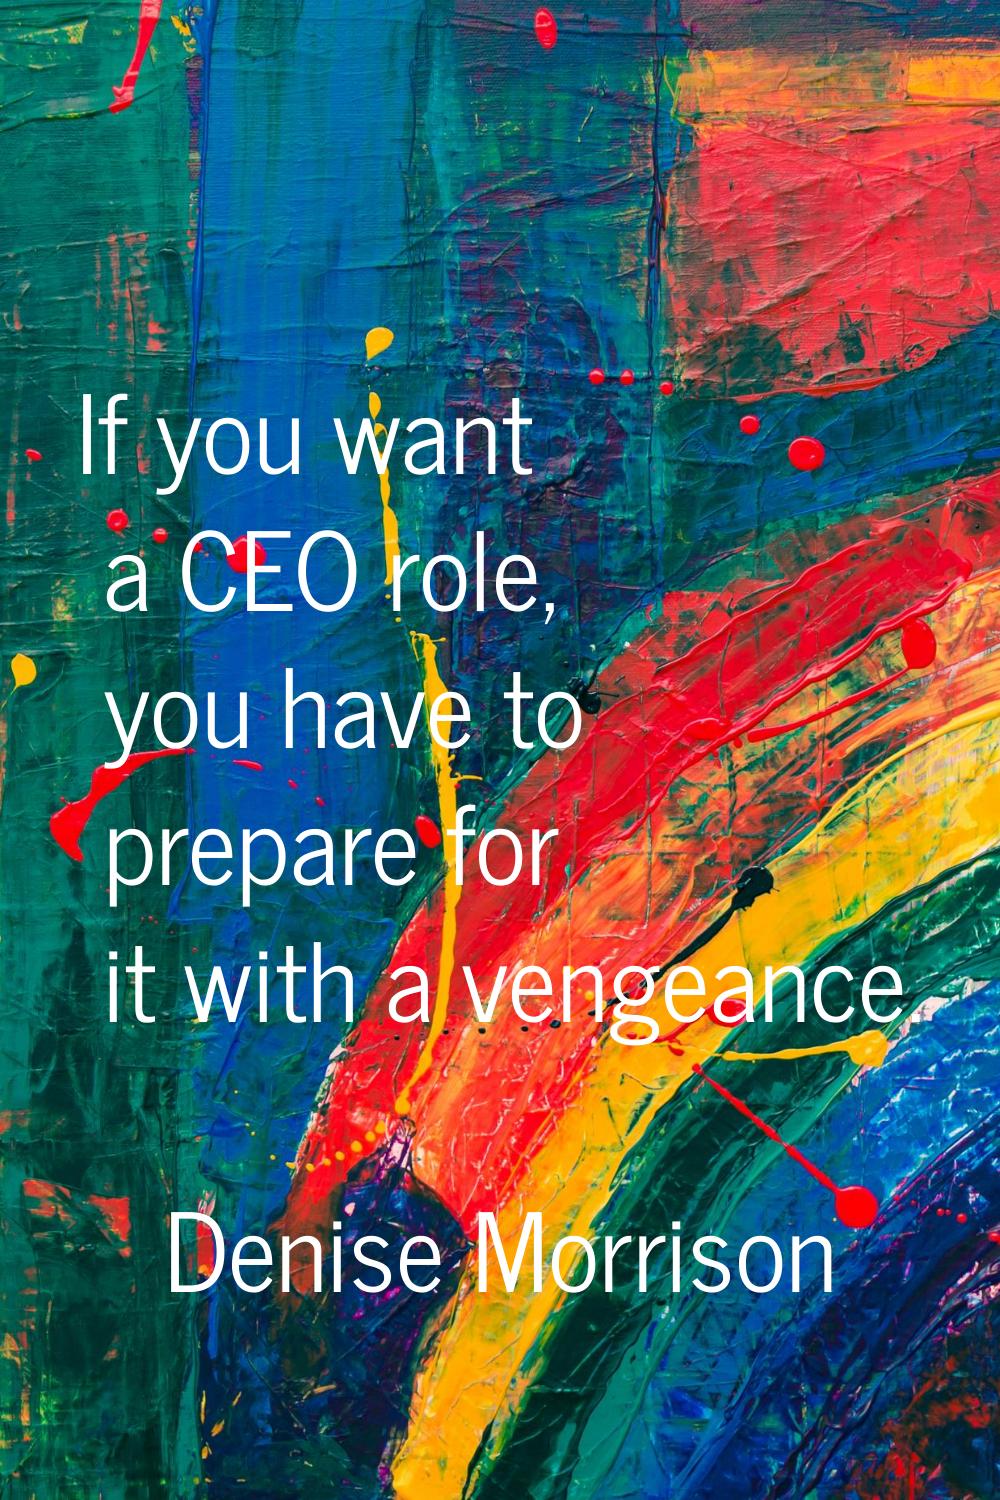 If you want a CEO role, you have to prepare for it with a vengeance.